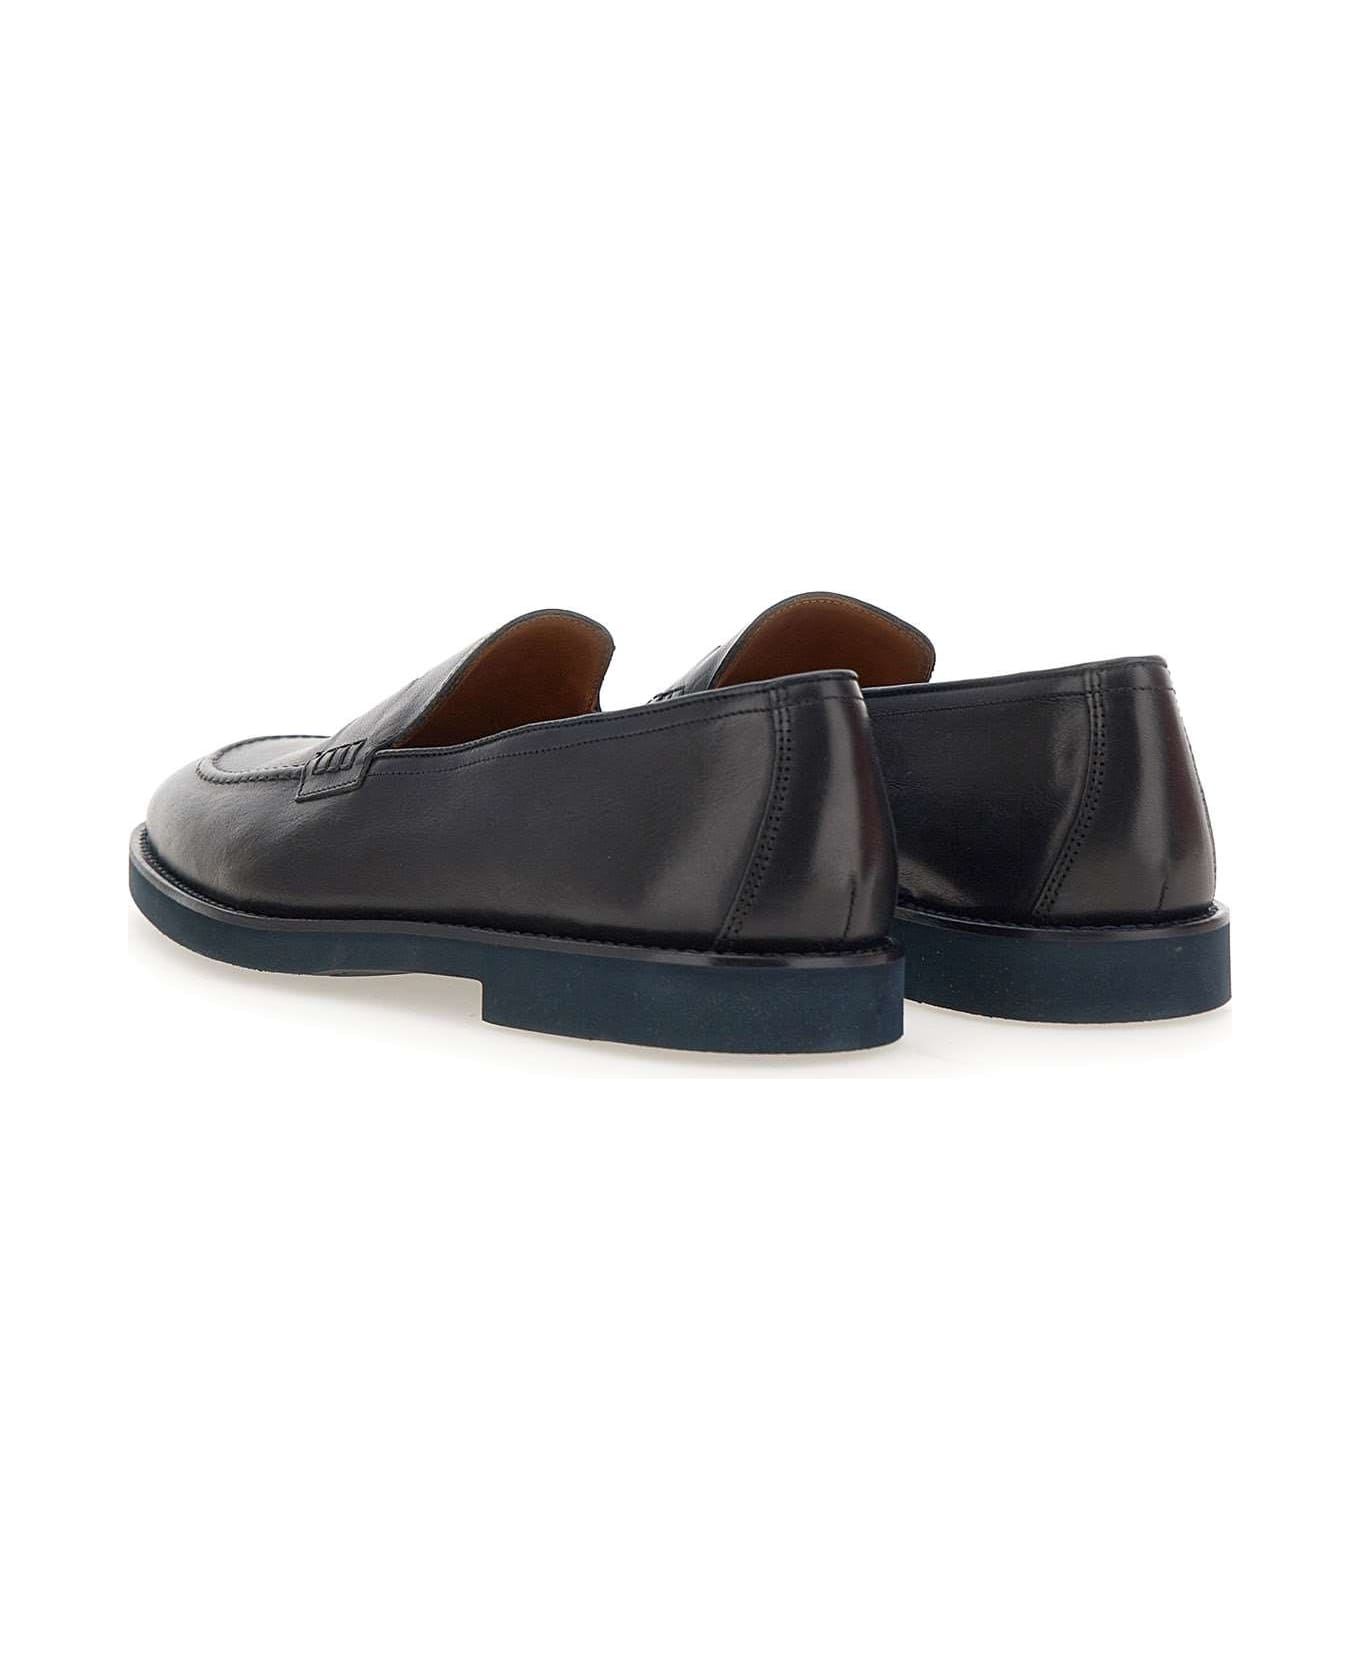 Doucal's "harley" Leather Moccasins - BLUE